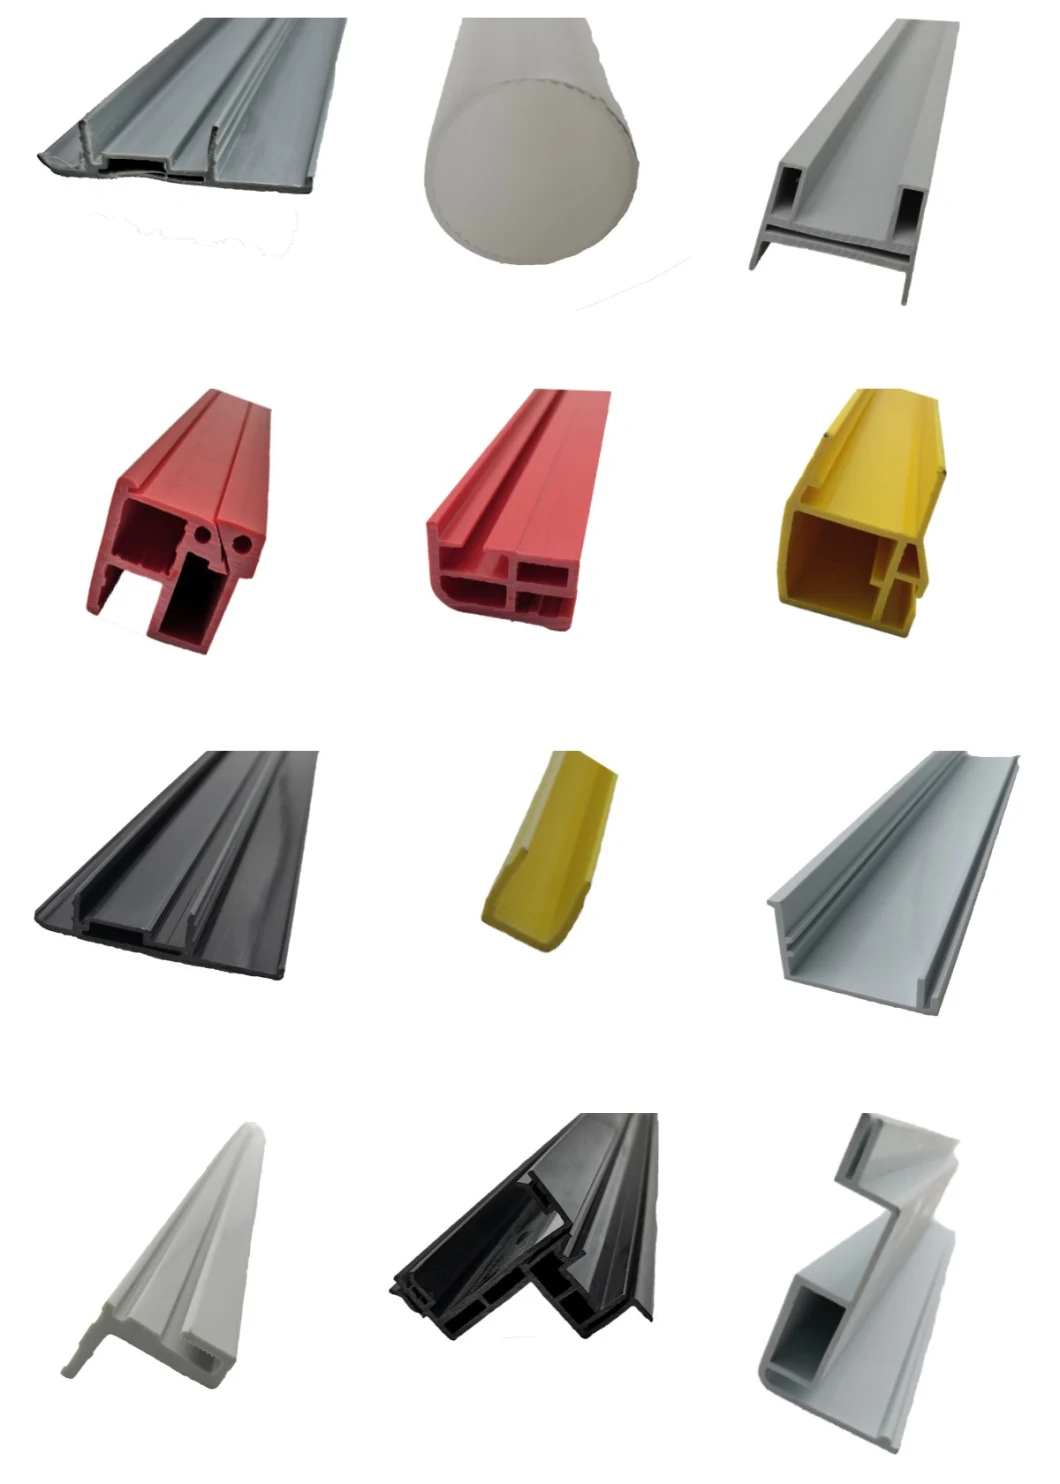 Customizable High Quality Plastic Extruded Profiles, Plastic Processing, Extruded PMMA Profiles